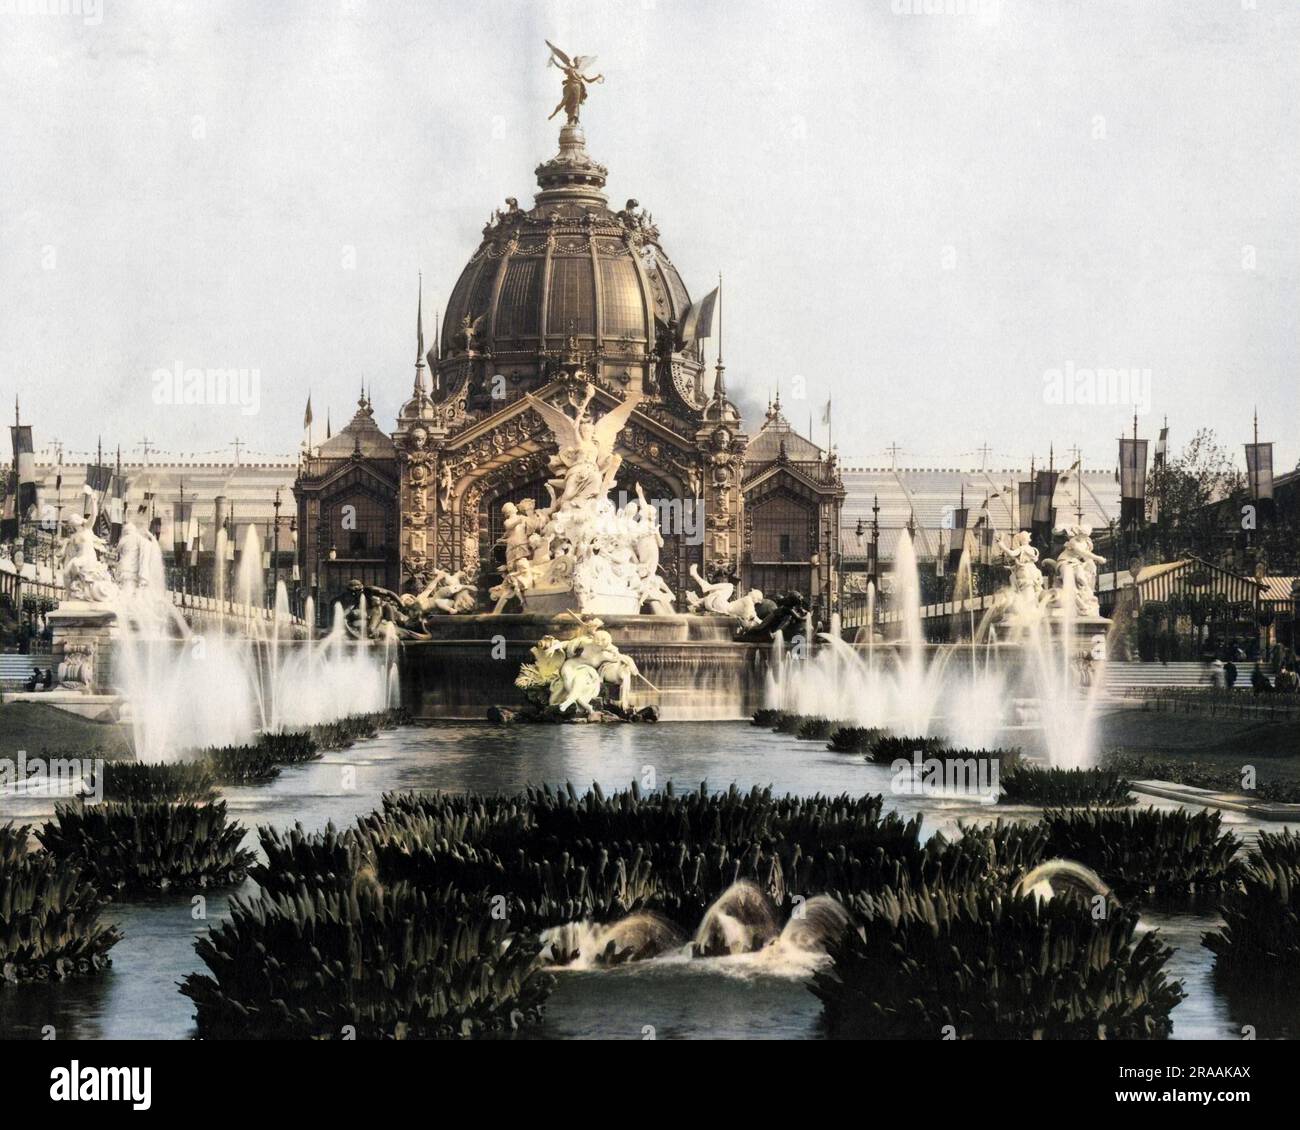 Scene during the Universal Exhibition (Exposition Universelle), Paris, France, with a large fountain and a domed building.     Date: 1900 Stock Photo